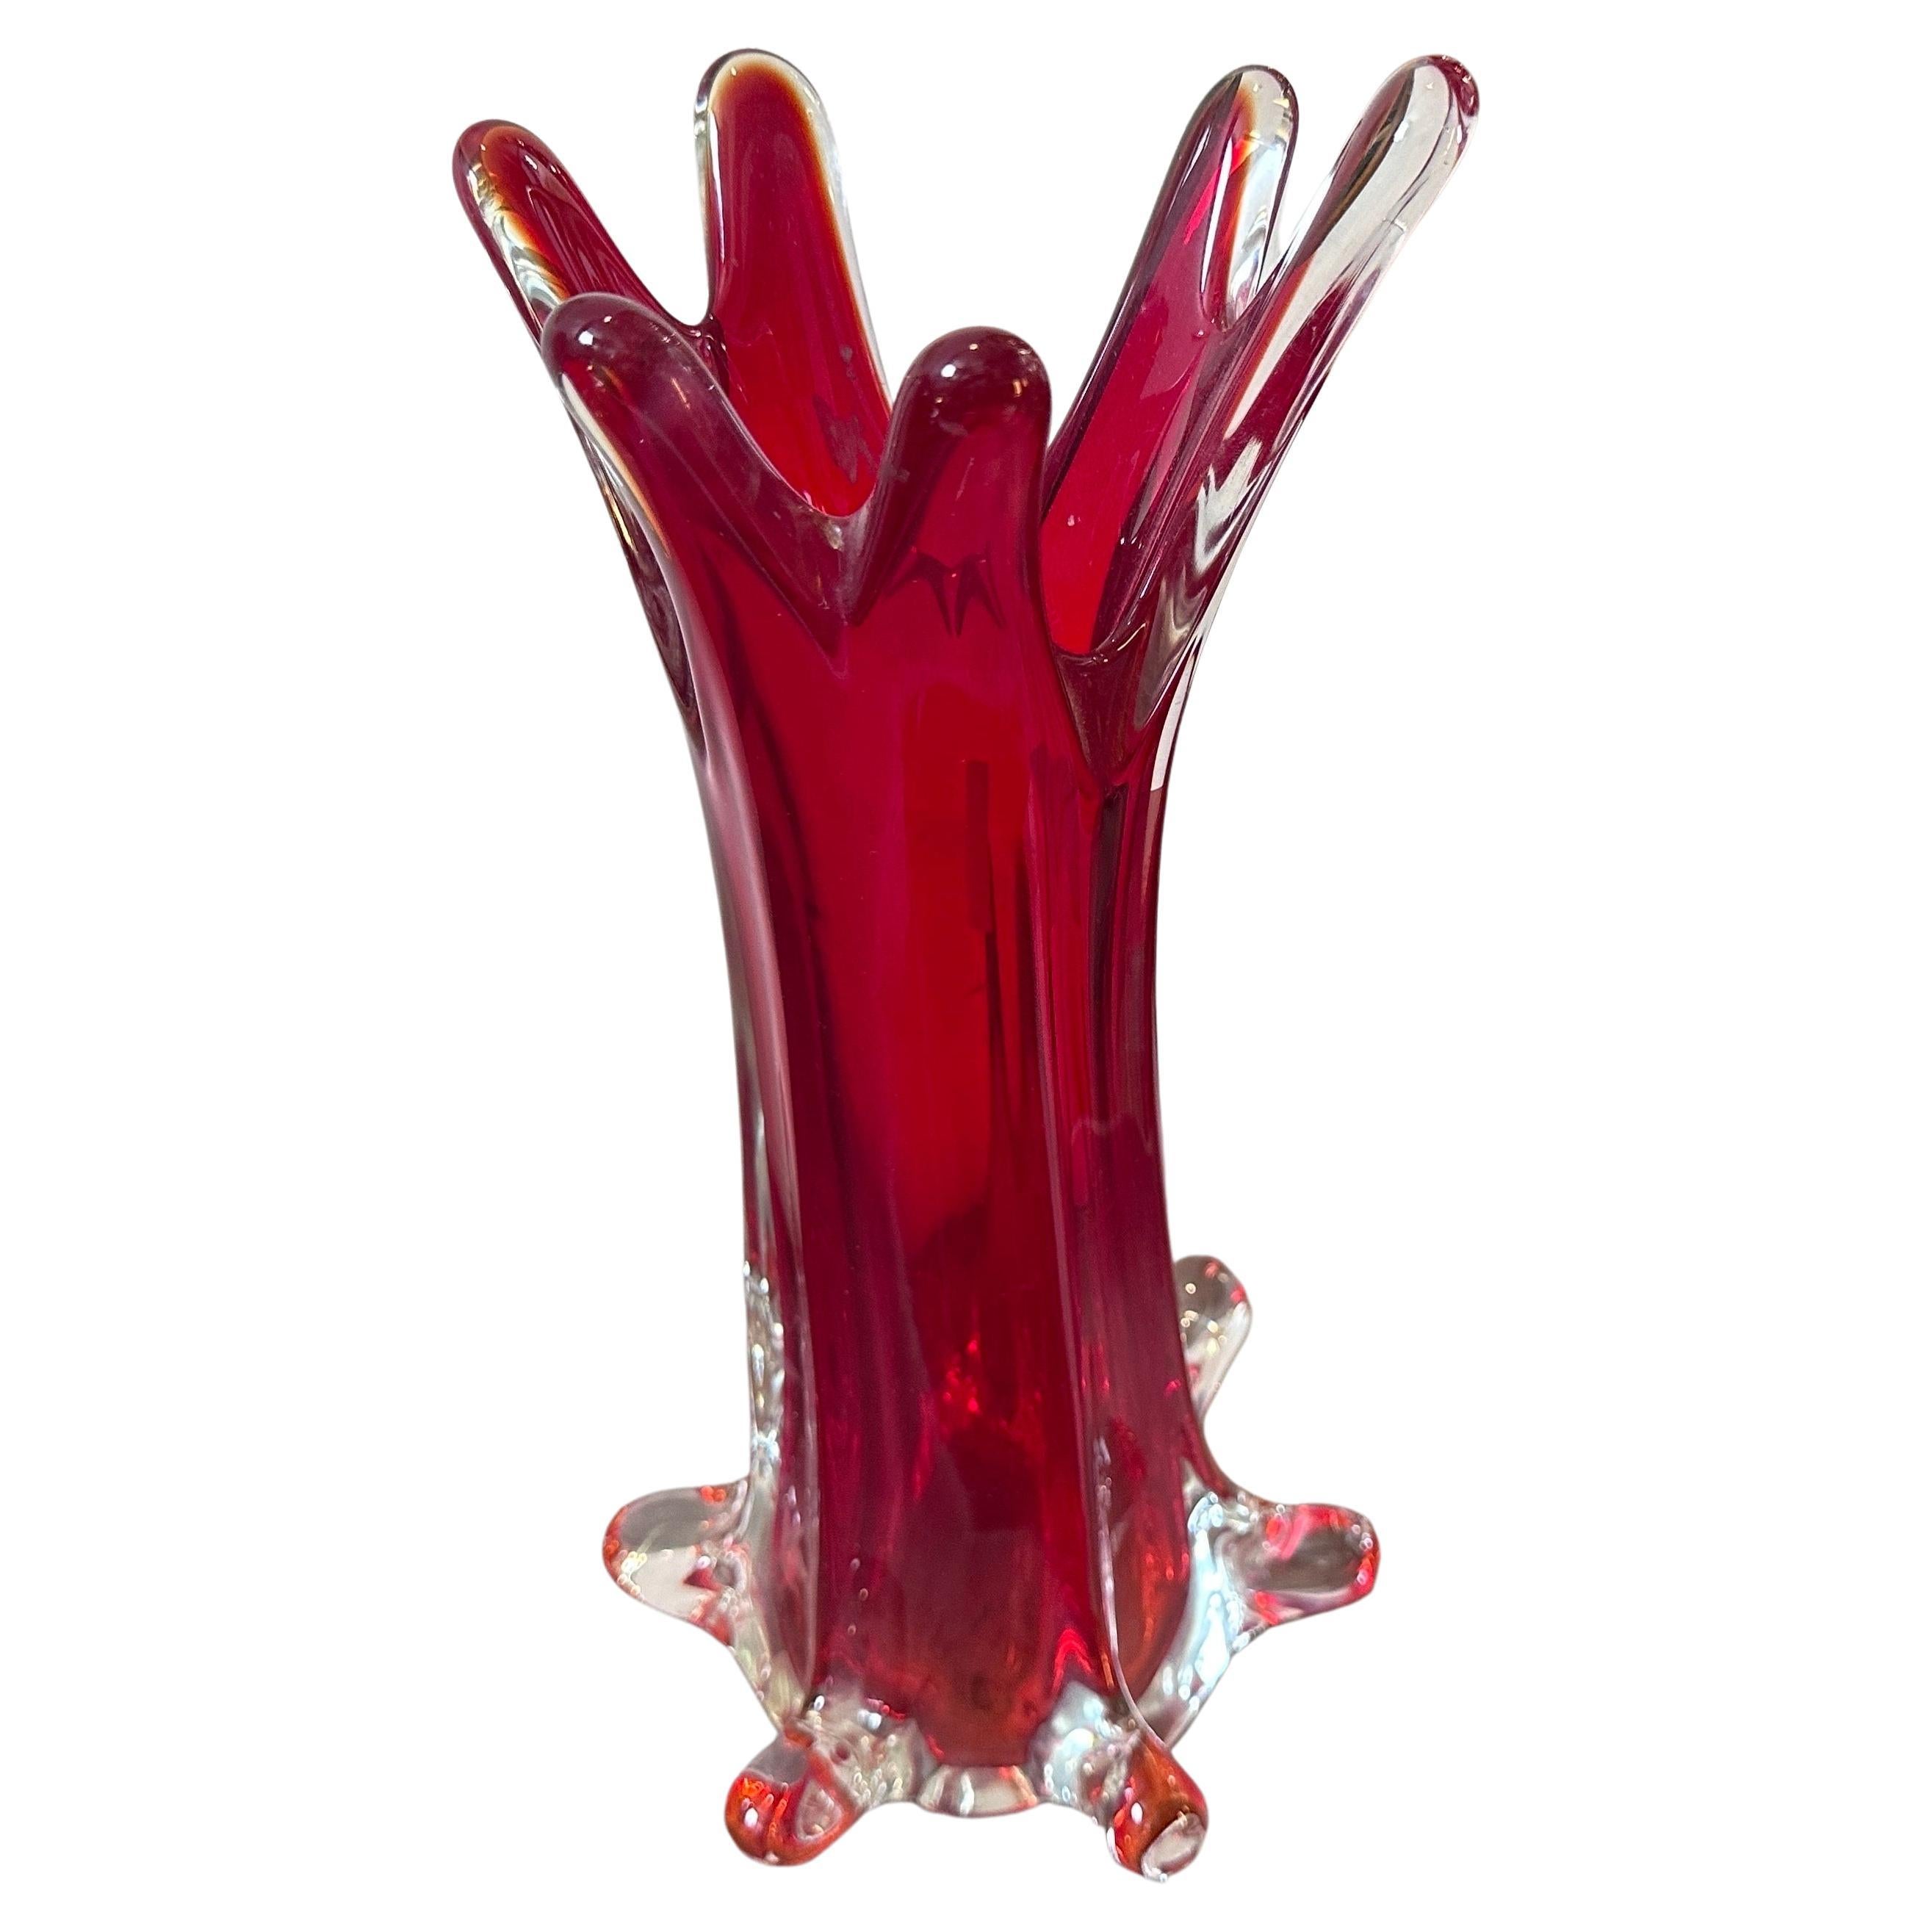 A red sommerso murano glass vase designed and manufactured in Venice By Seguso in the Eighties, vase it's in perfect condition. This Tall Vase by Seguso it's a beautiful and collectible piece of art glass. Murano glass refers to glassware produced